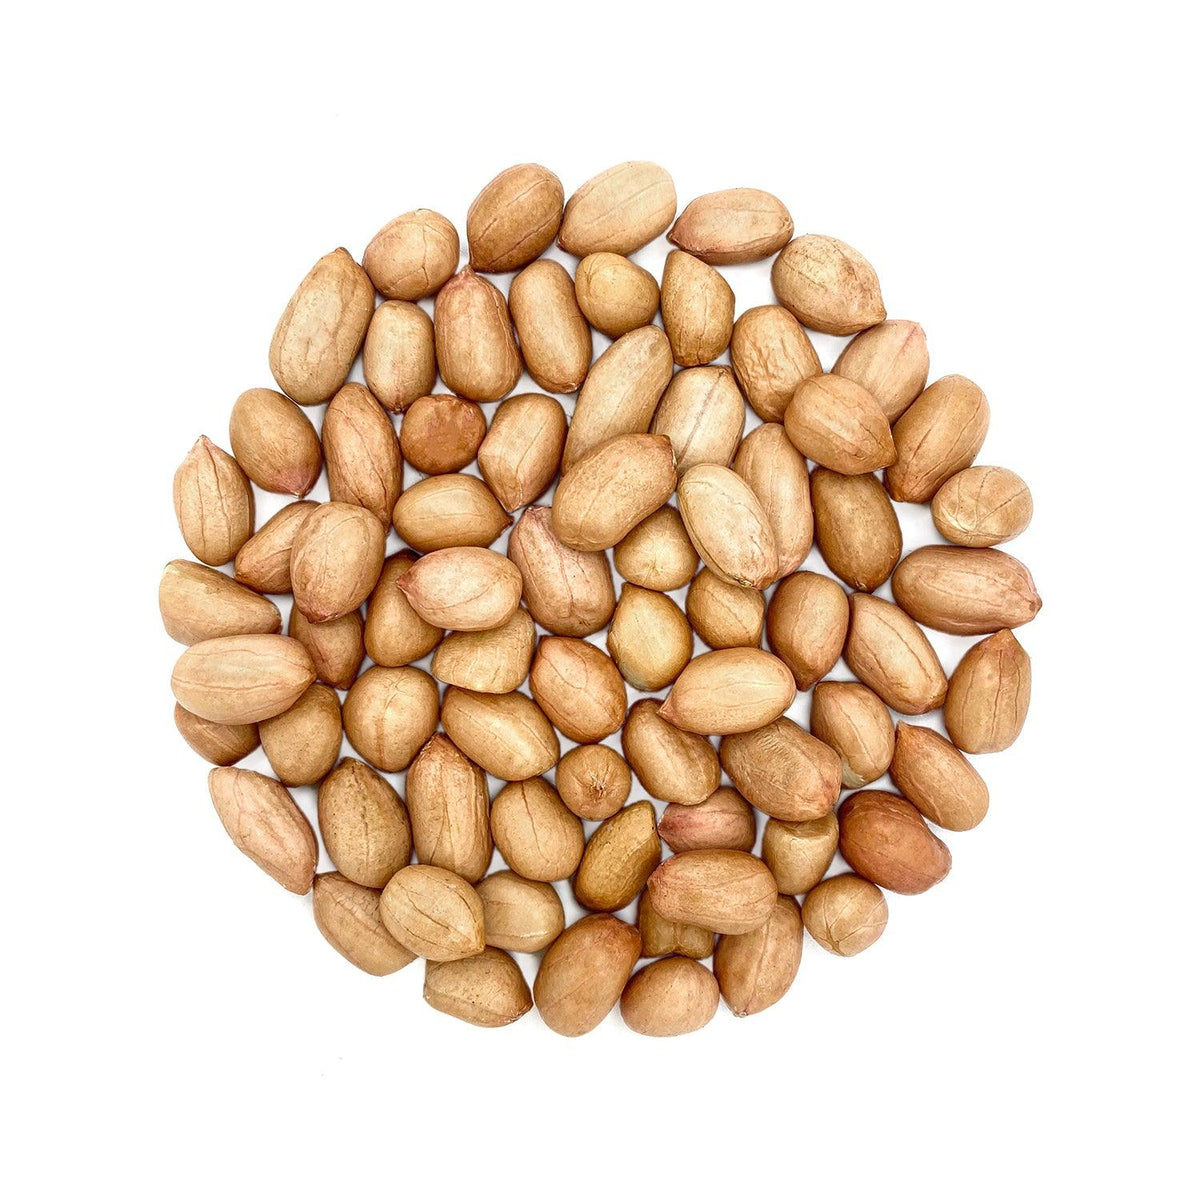 Peanuts Whole - Unroasted Mungfali | Groundnut 800g -Natural & Organic nuts of Choicest Quality without Outer shell - Aflatoxin free -No Additives or Preservatives. - Satopradhan